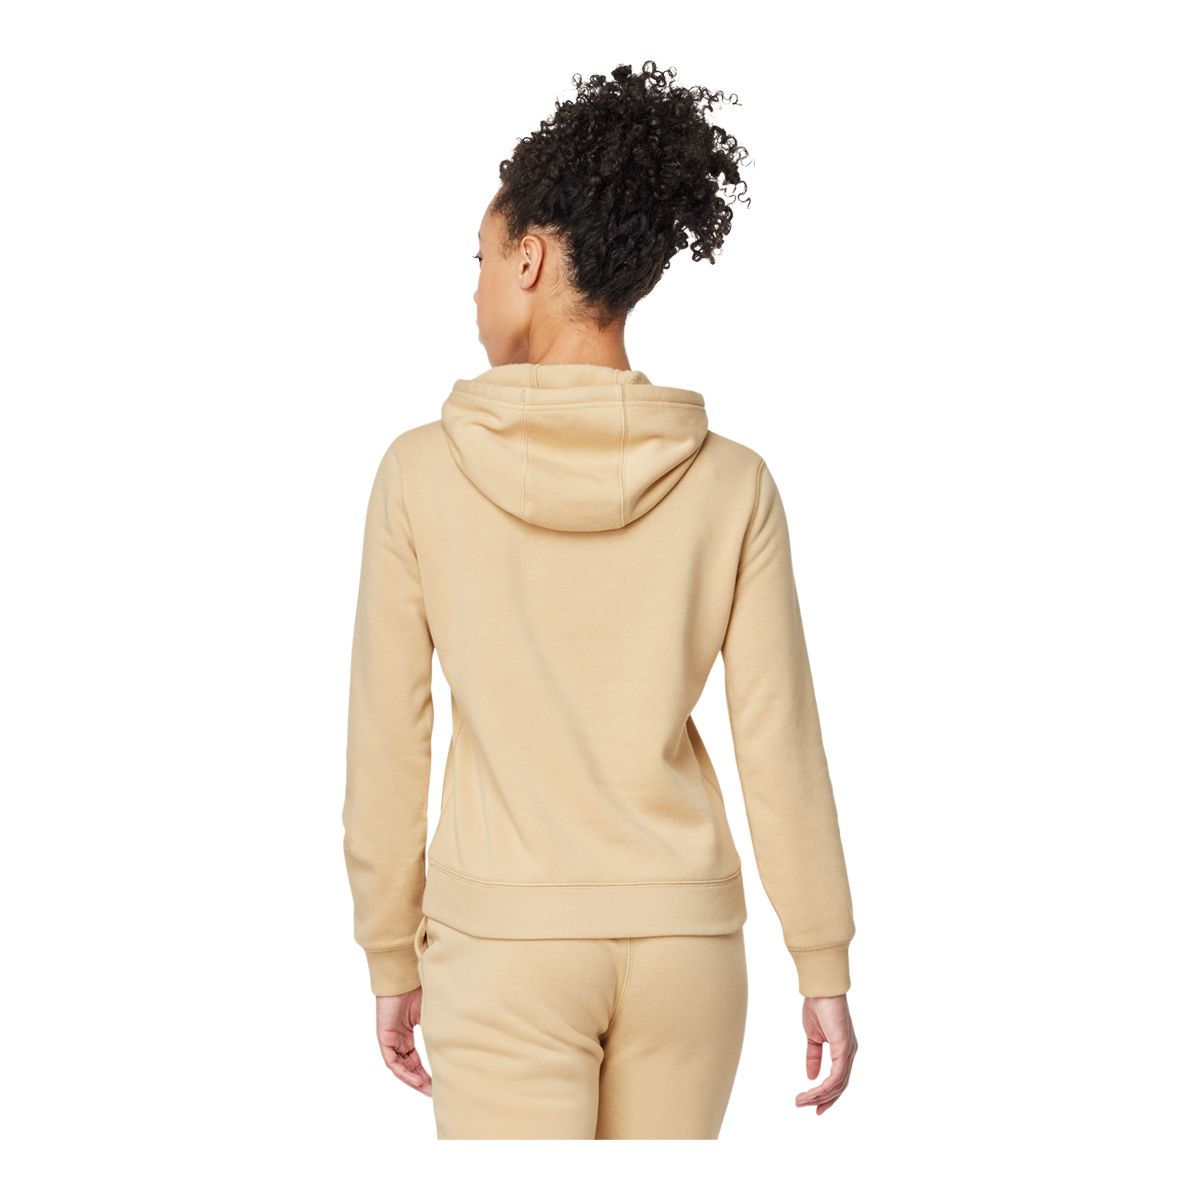 Alo Streets & Maps Athletic Hoodies for Women